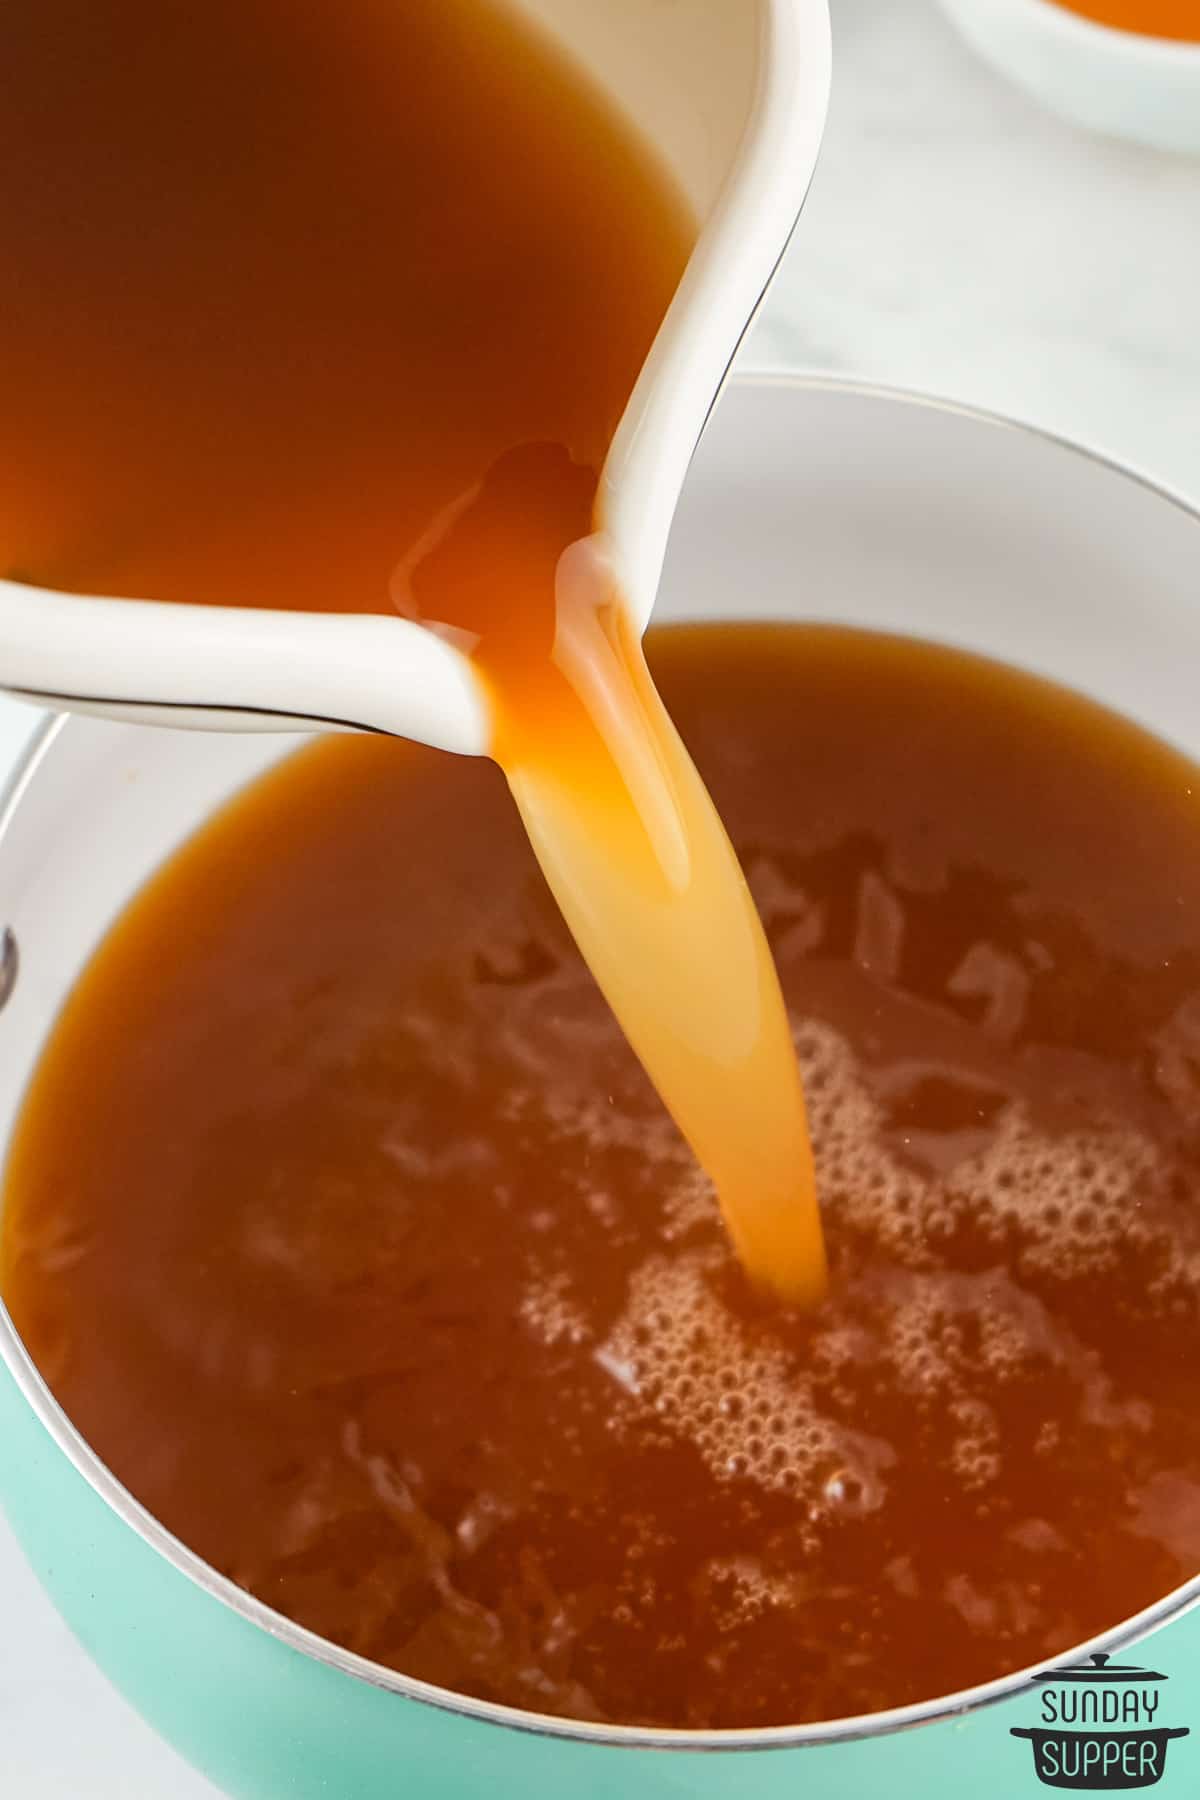 vinegar and brown sugar being poured into a pan